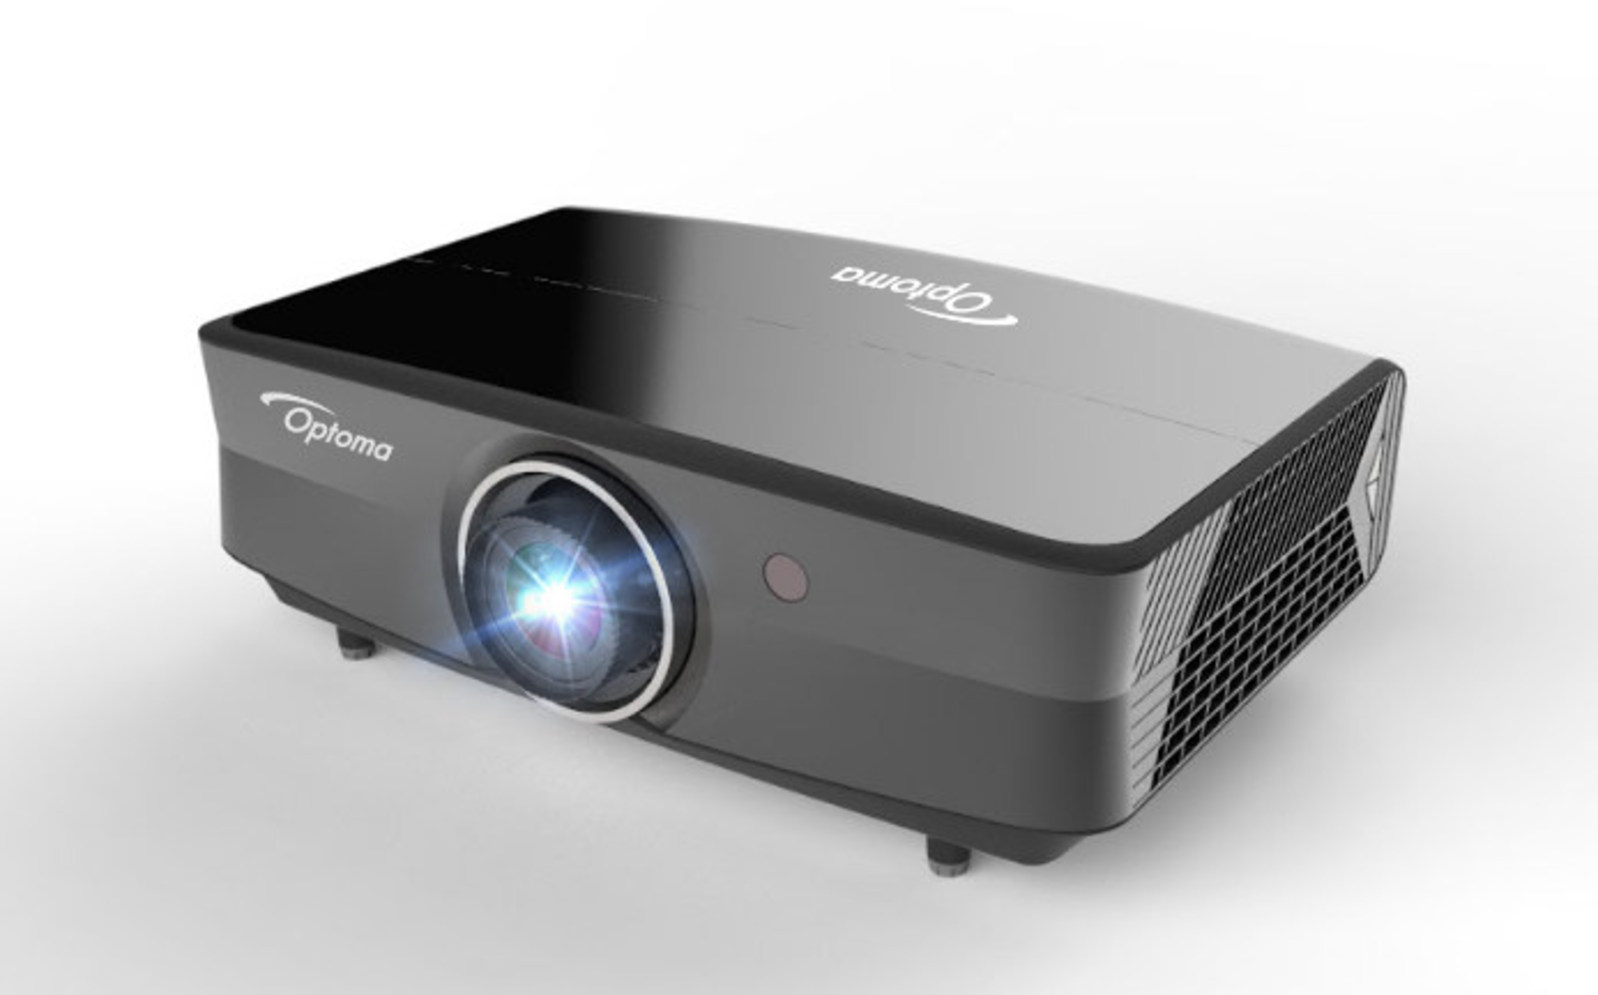 New 4K laser projector brings cinema experience into homes Live for Films